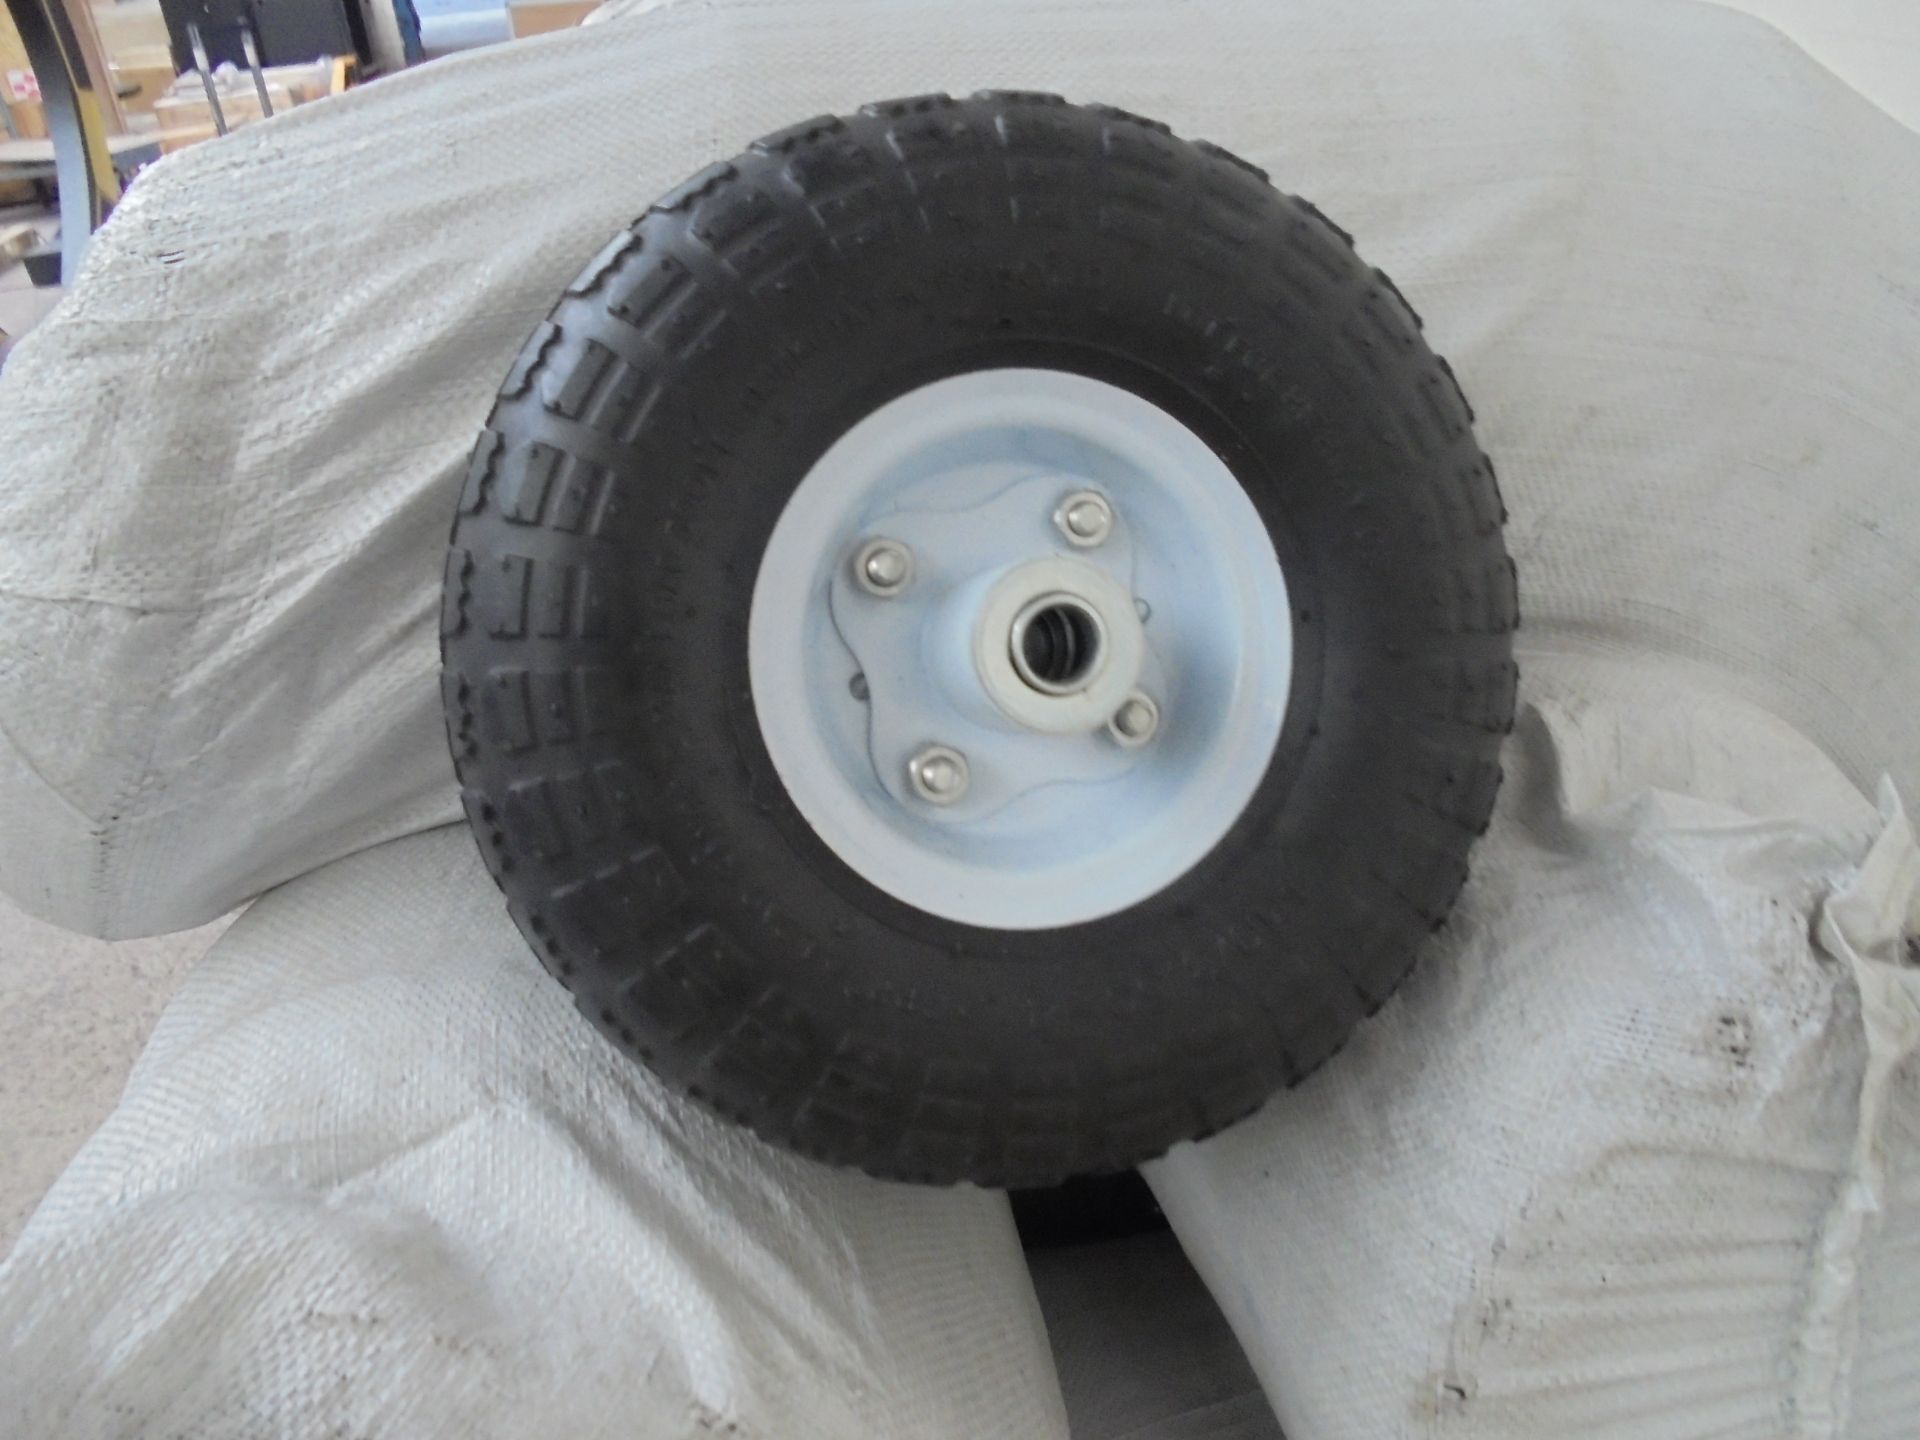 10x Nylon tube tyres for Heavy duty sack trucks, new and all pumped up.